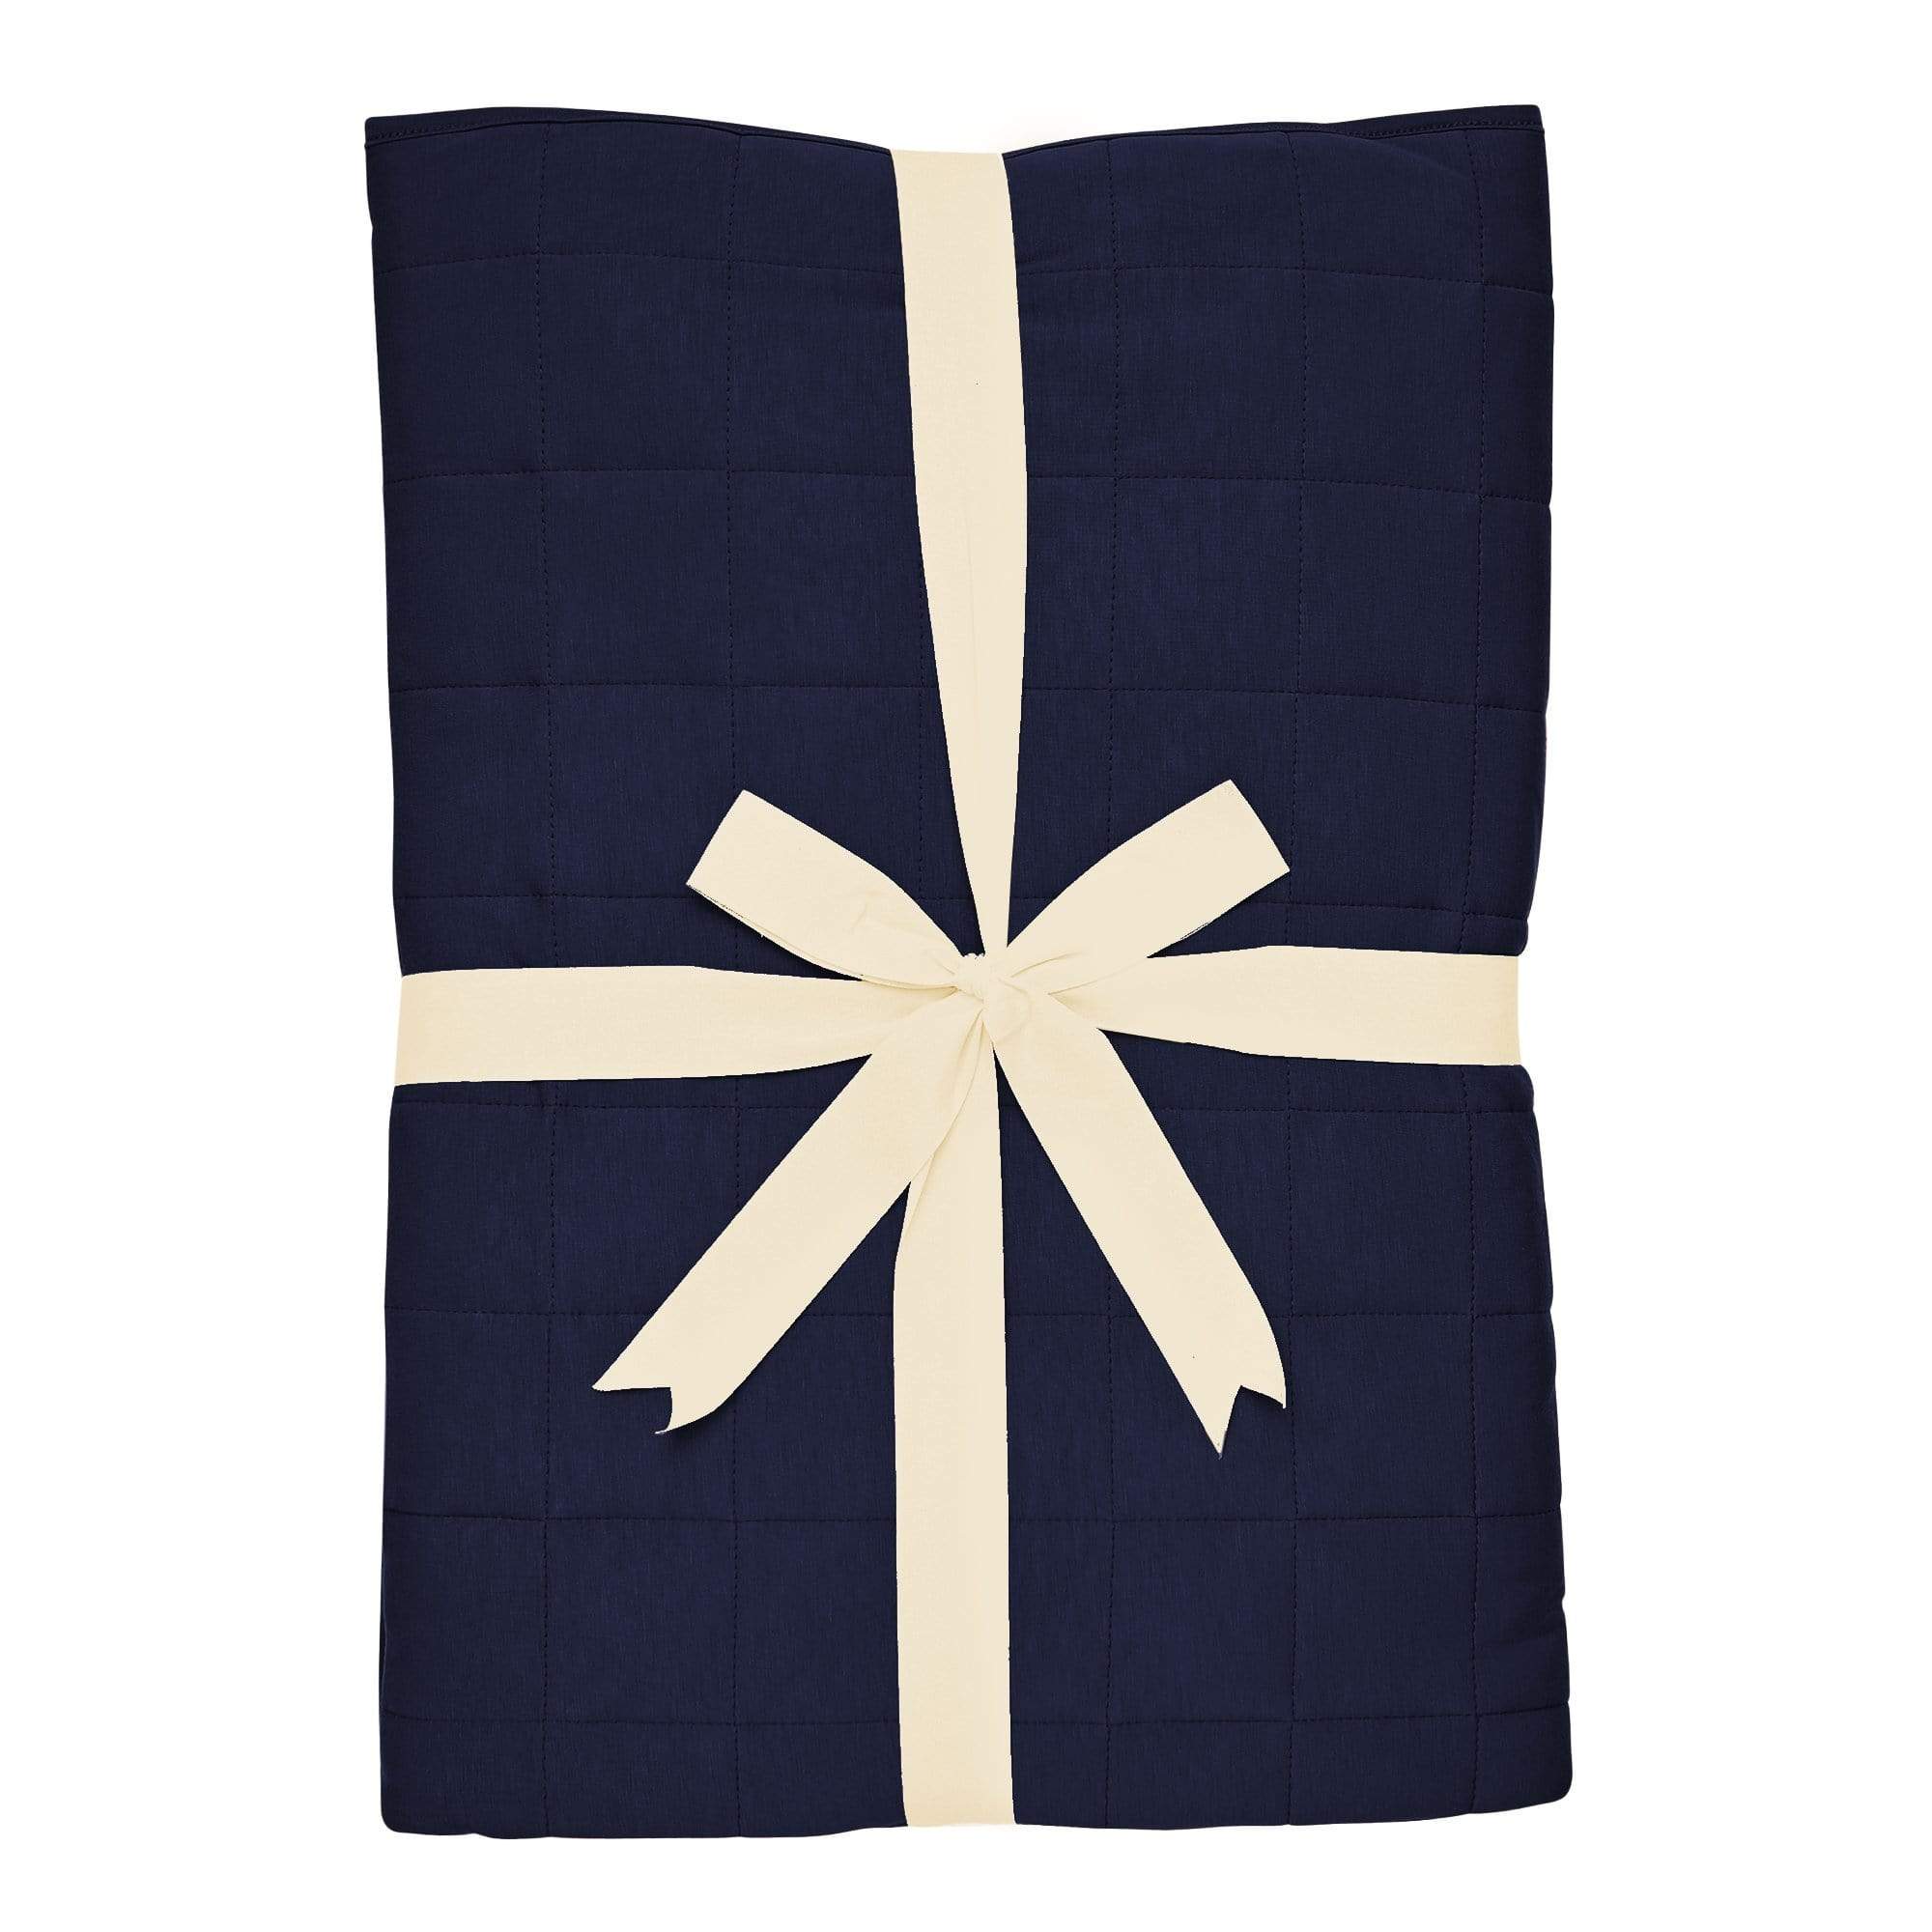 Kyte BABY Youth Blanket Navy / Youth / 2.5 Tog Youth Blanket in Navy